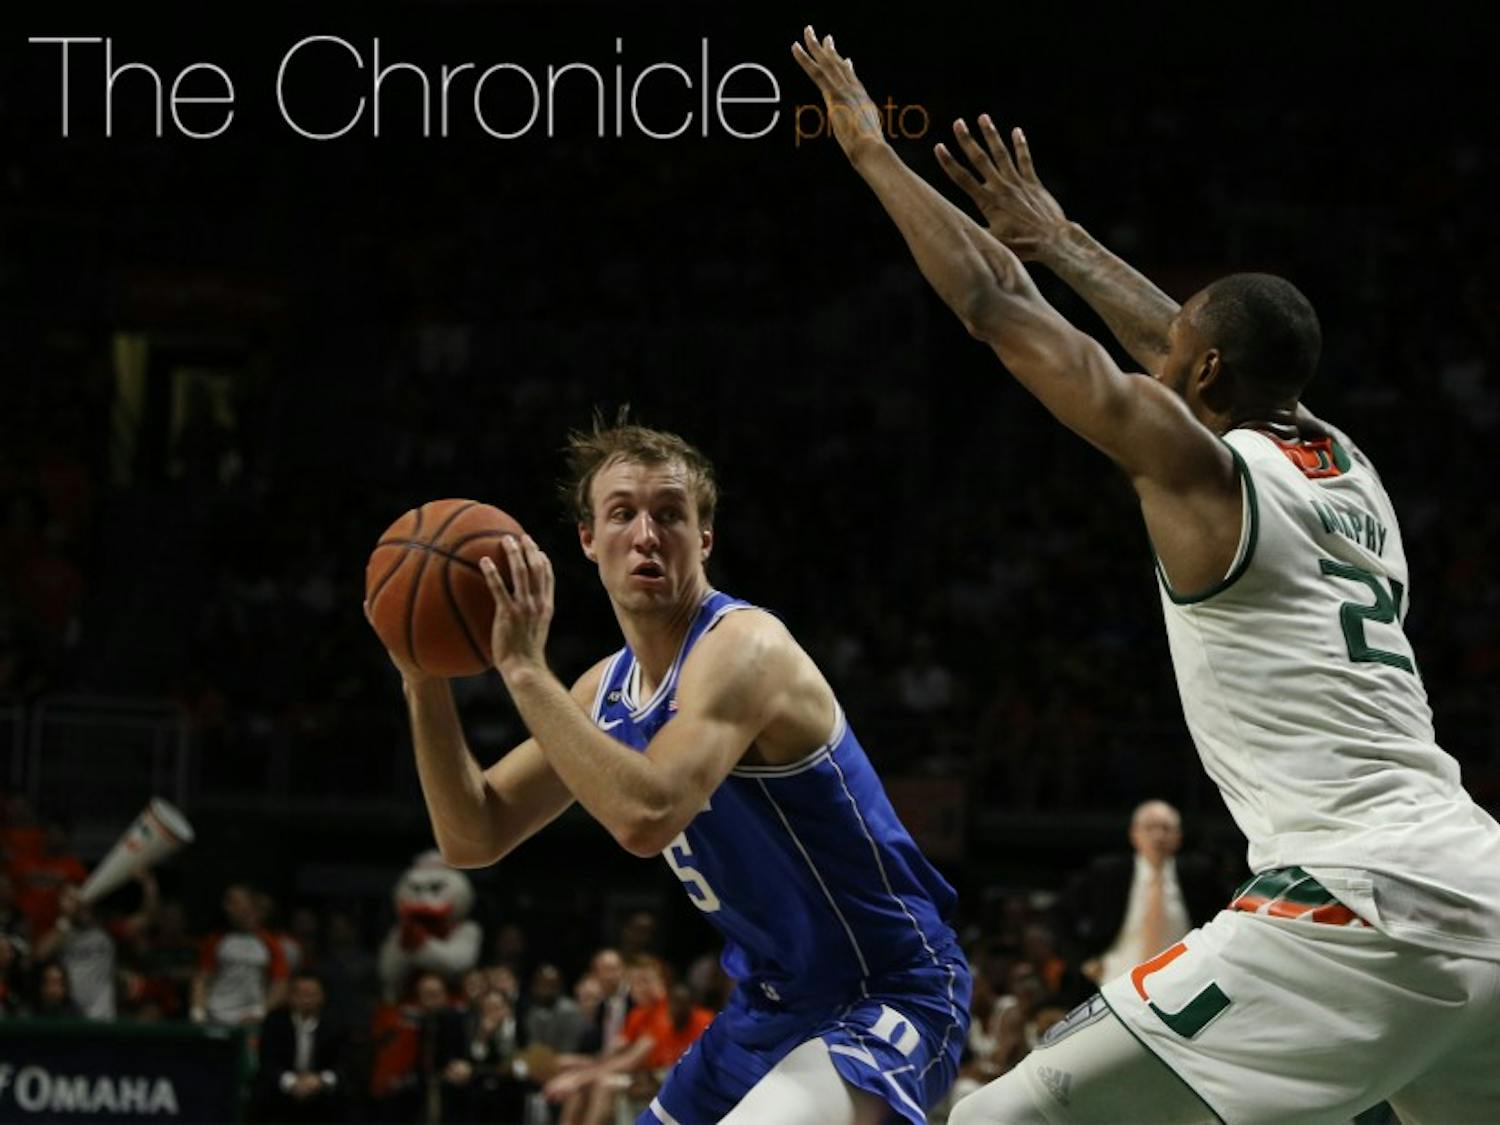 Luke Kennard earned second-team All-American honors after a breakthrough season as the second-leading scorer in the ACC.